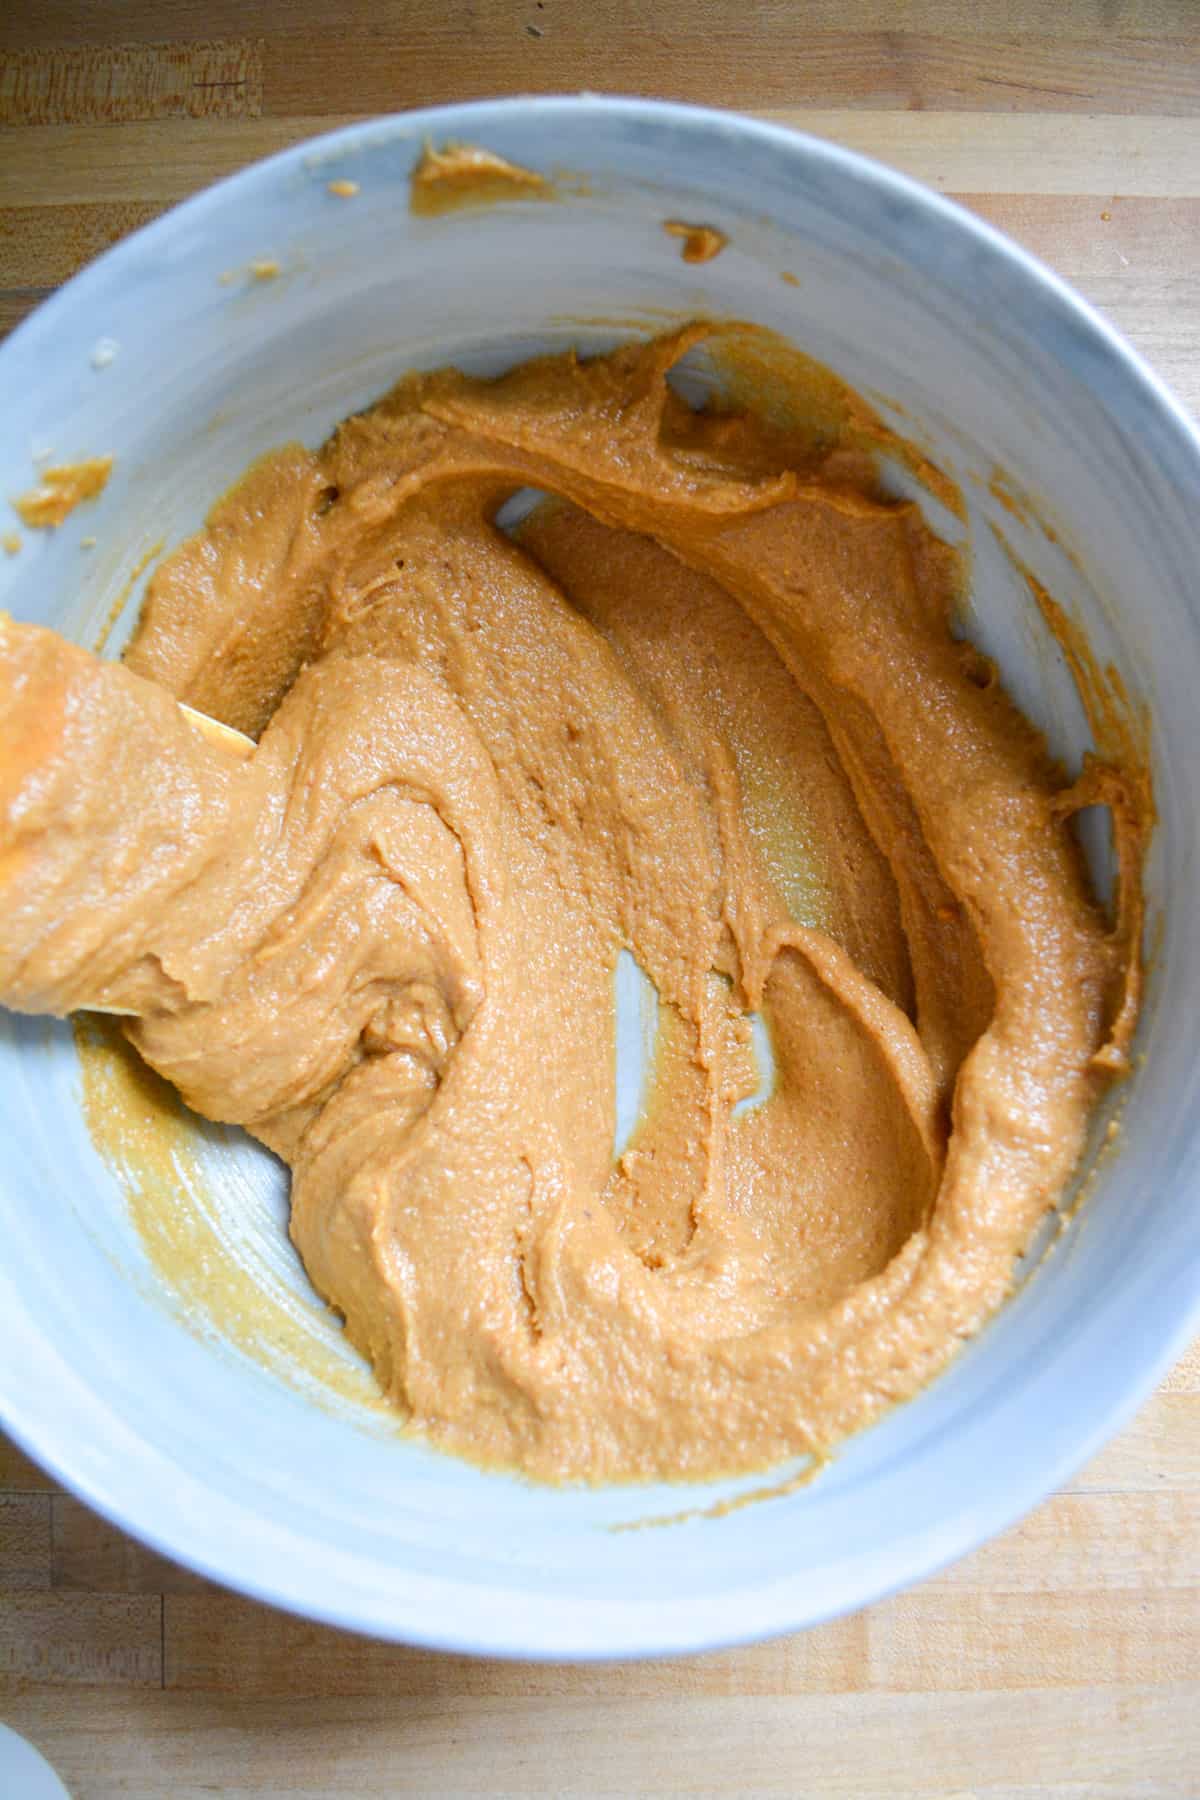 Peanut butter added into the vegan butter and brown sugar.